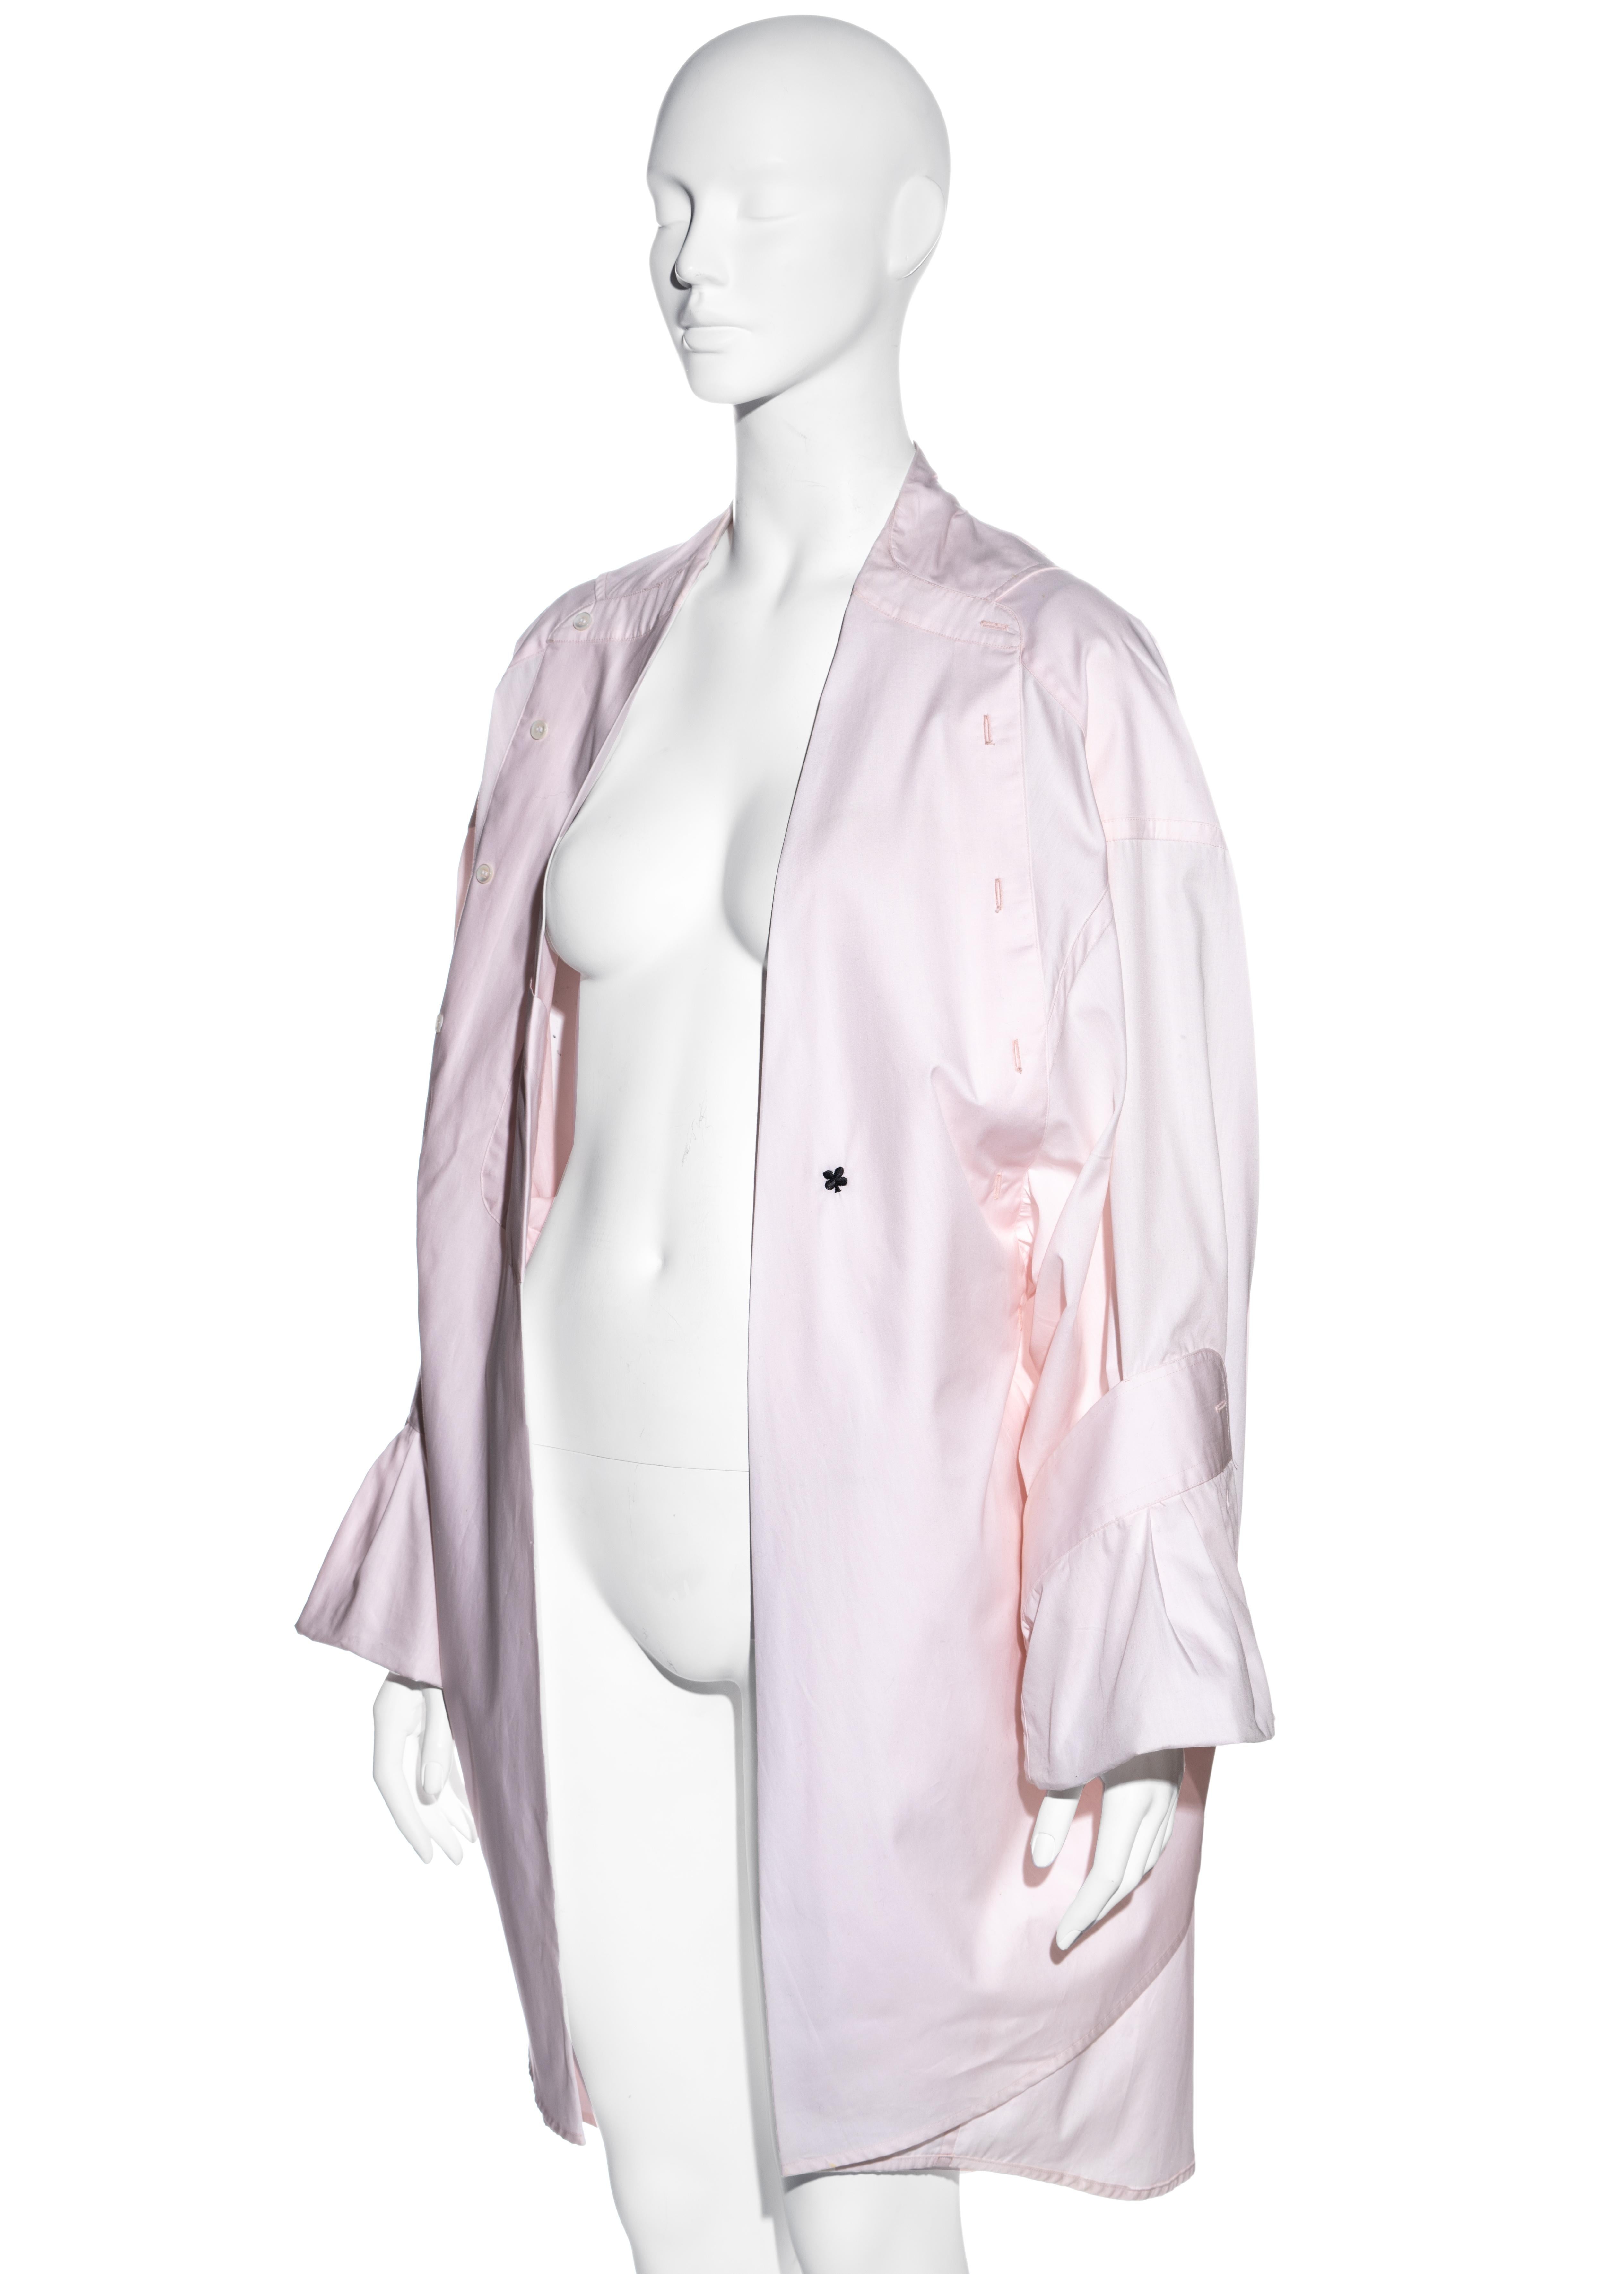 ▪ Martin Margiela pink oversized shirt 
▪ 100% Cotton
▪ Oversized fit 
▪ Deconstructed design with sewn folds 
▪ Embroidered four-leaf clover 
▪ Size Medium
▪ Spring-Summer 2001